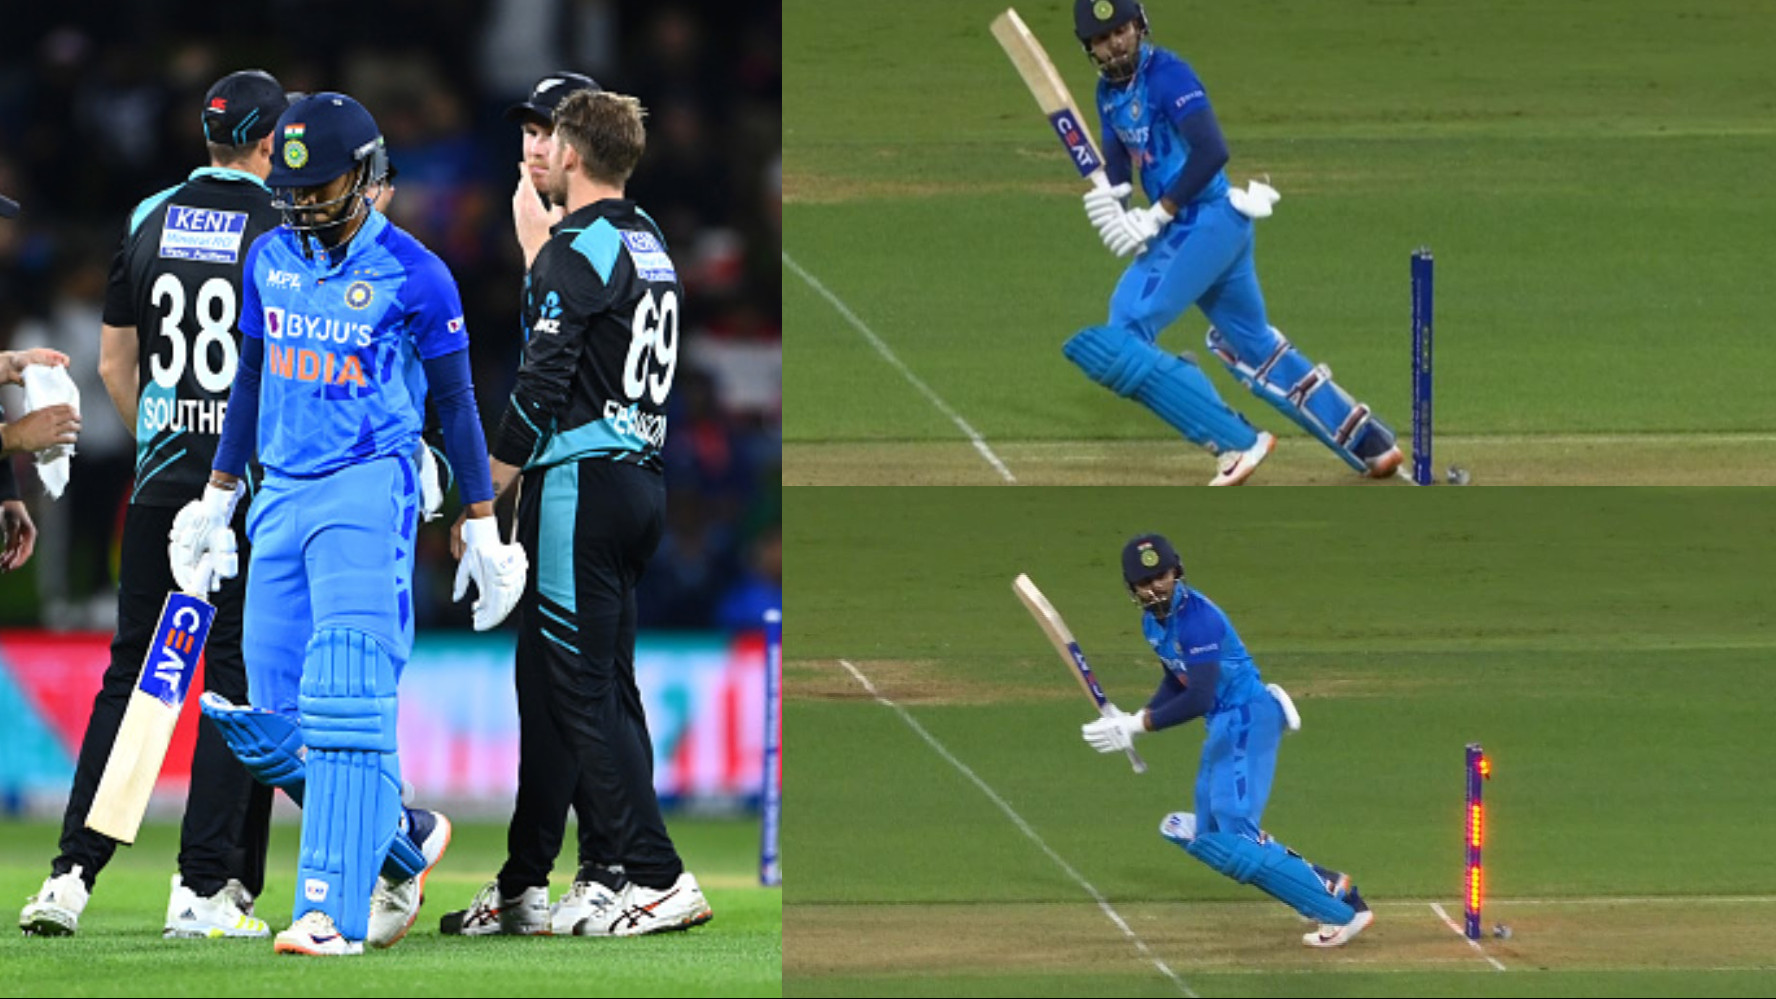 NZ v IND 2022: WATCH- Shreyas Iyer trots onto his stumps in trying to fend off a short ball in 2nd T20I